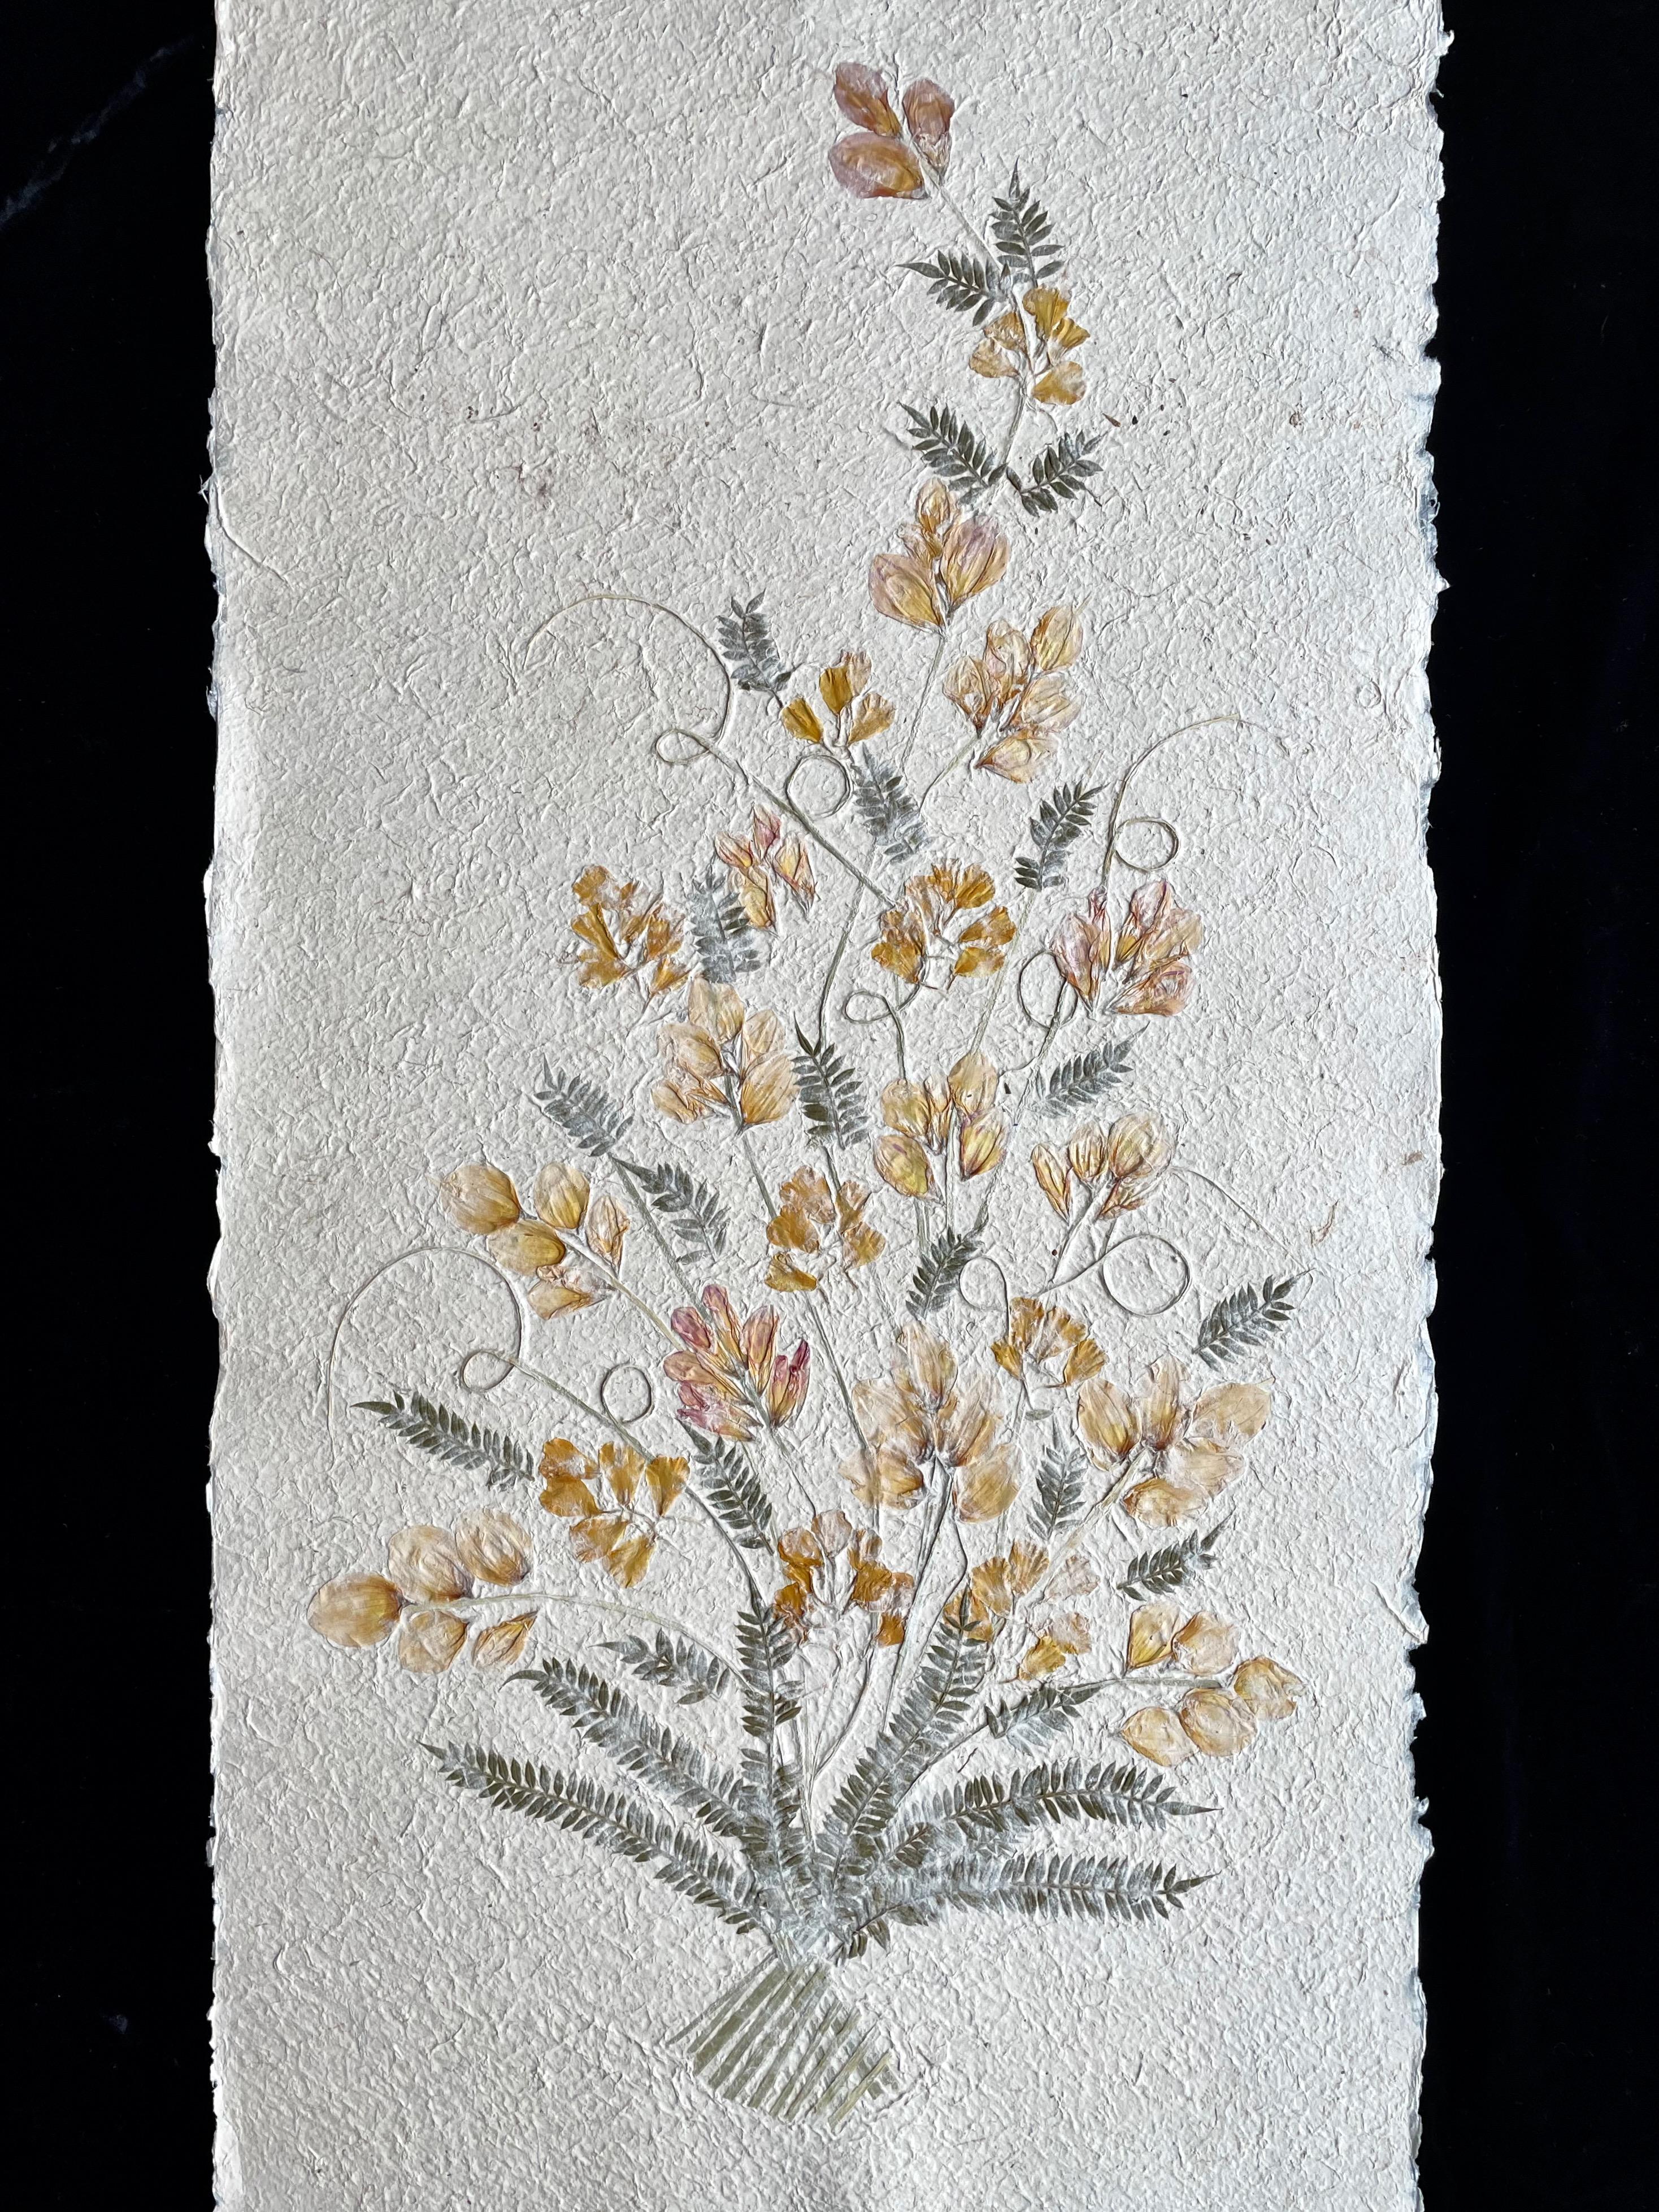 Madagascan Dried Flowers On Hand Made Paper - Mixed Media Art by Unknown